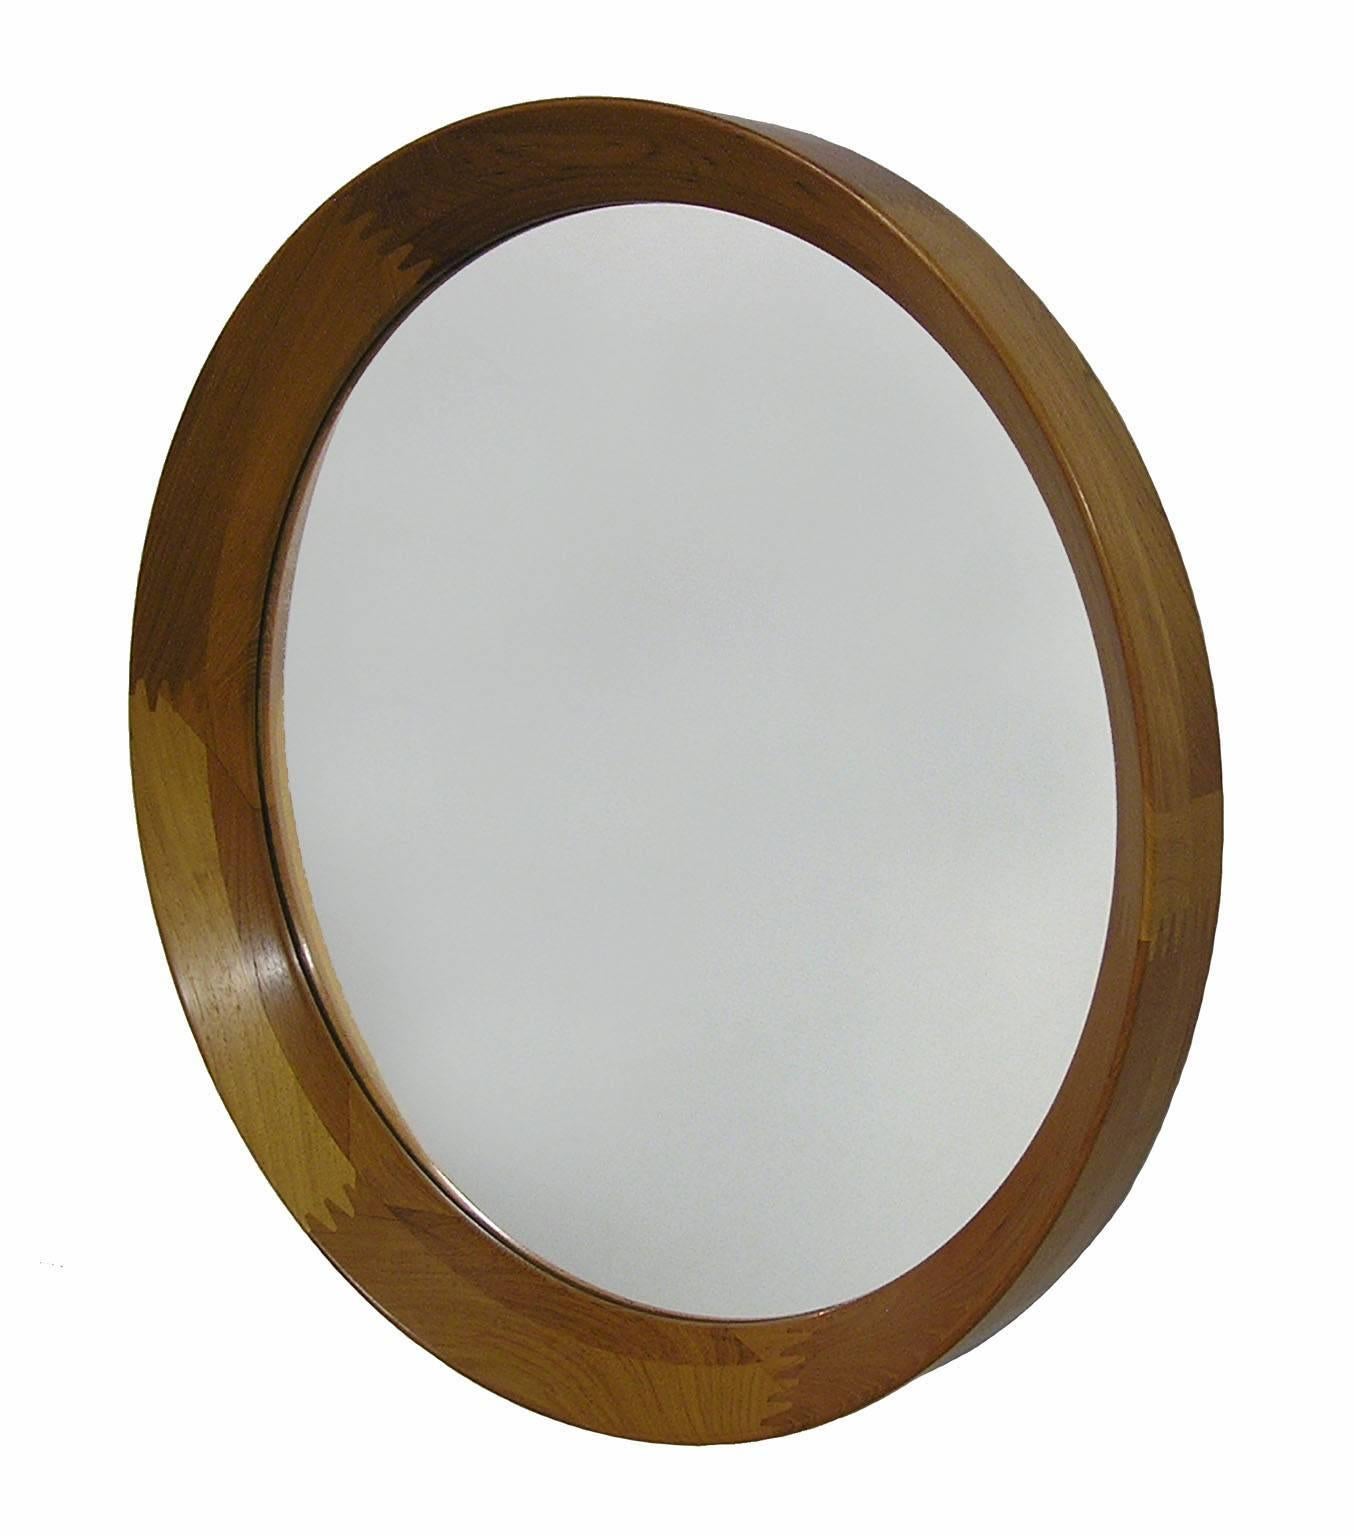 A quality round teak wall mirror from the 1960s by Pederson & Hansen of Denmark. Stunning workmanship throughout featuring a 2